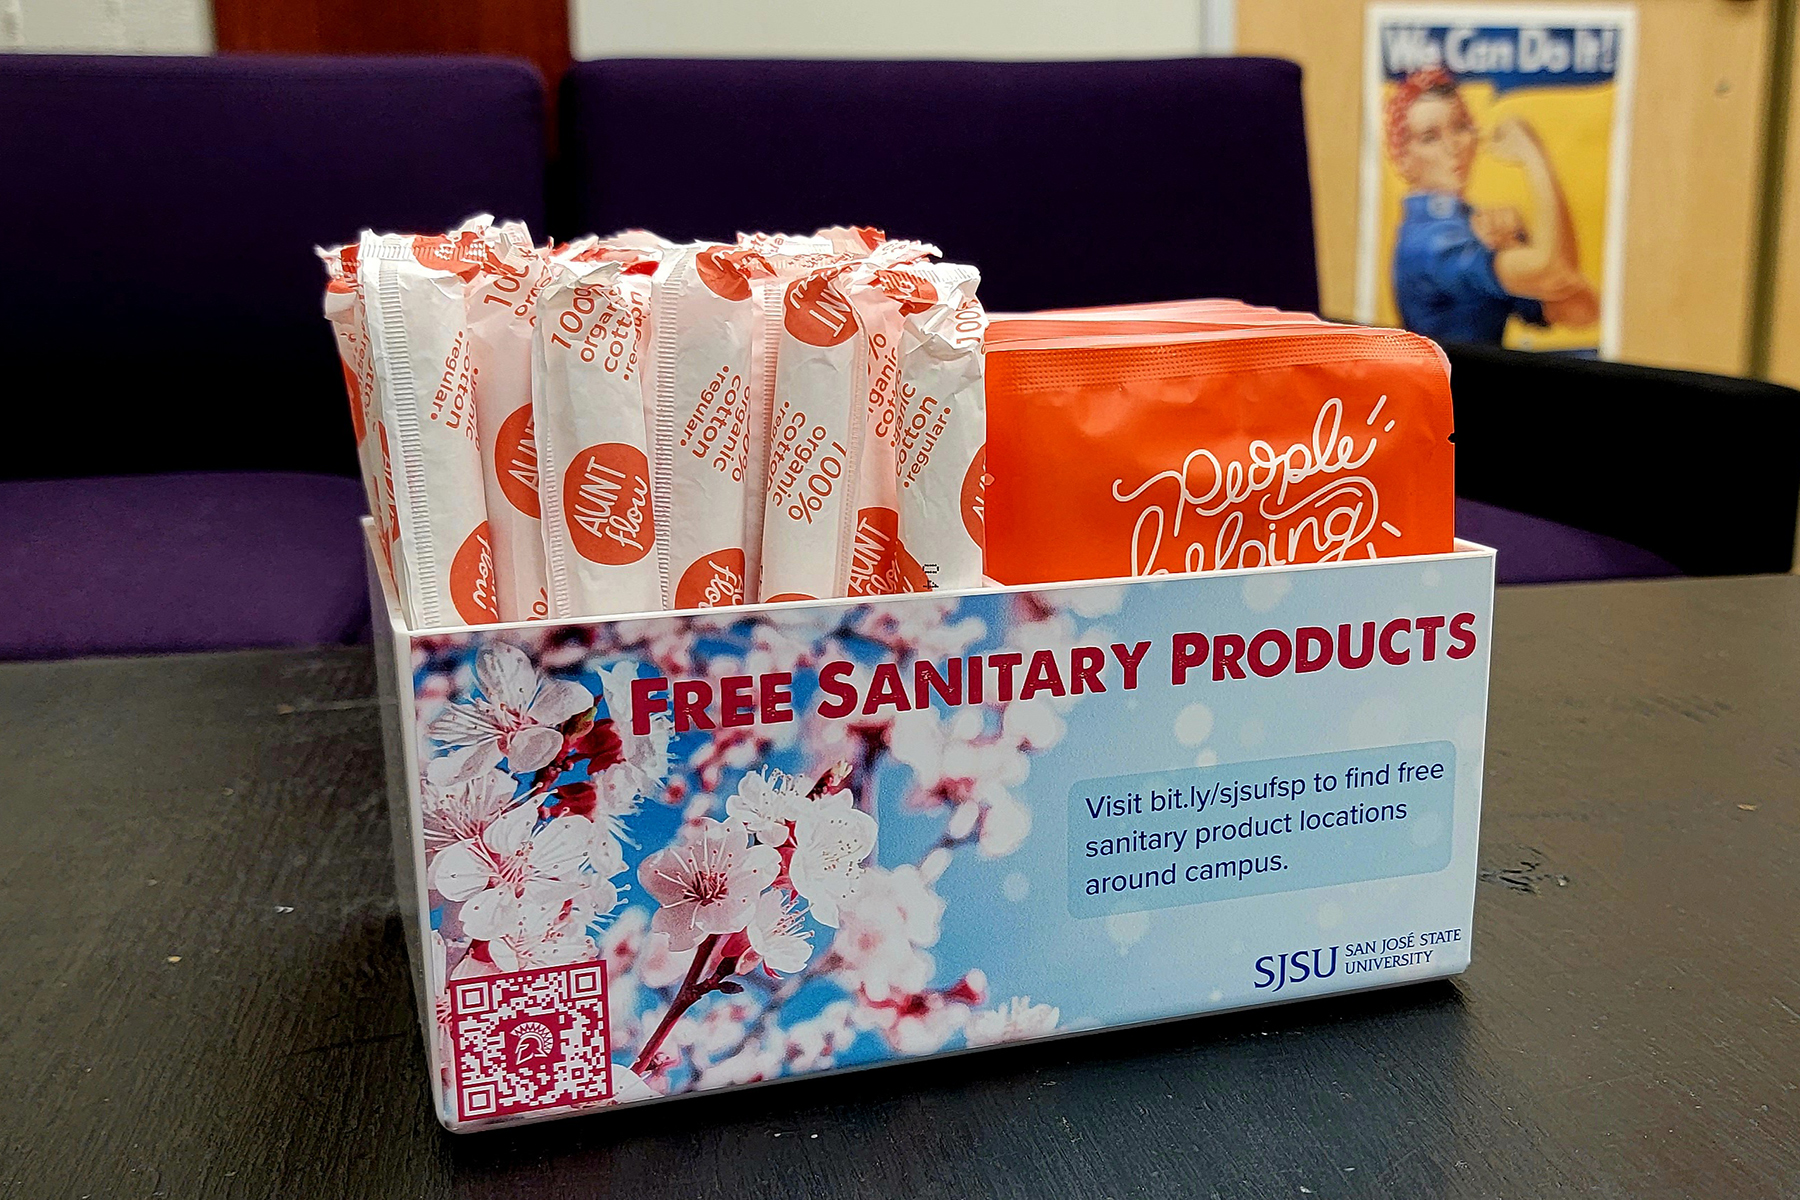 Display of sanitary products in a distribution box.